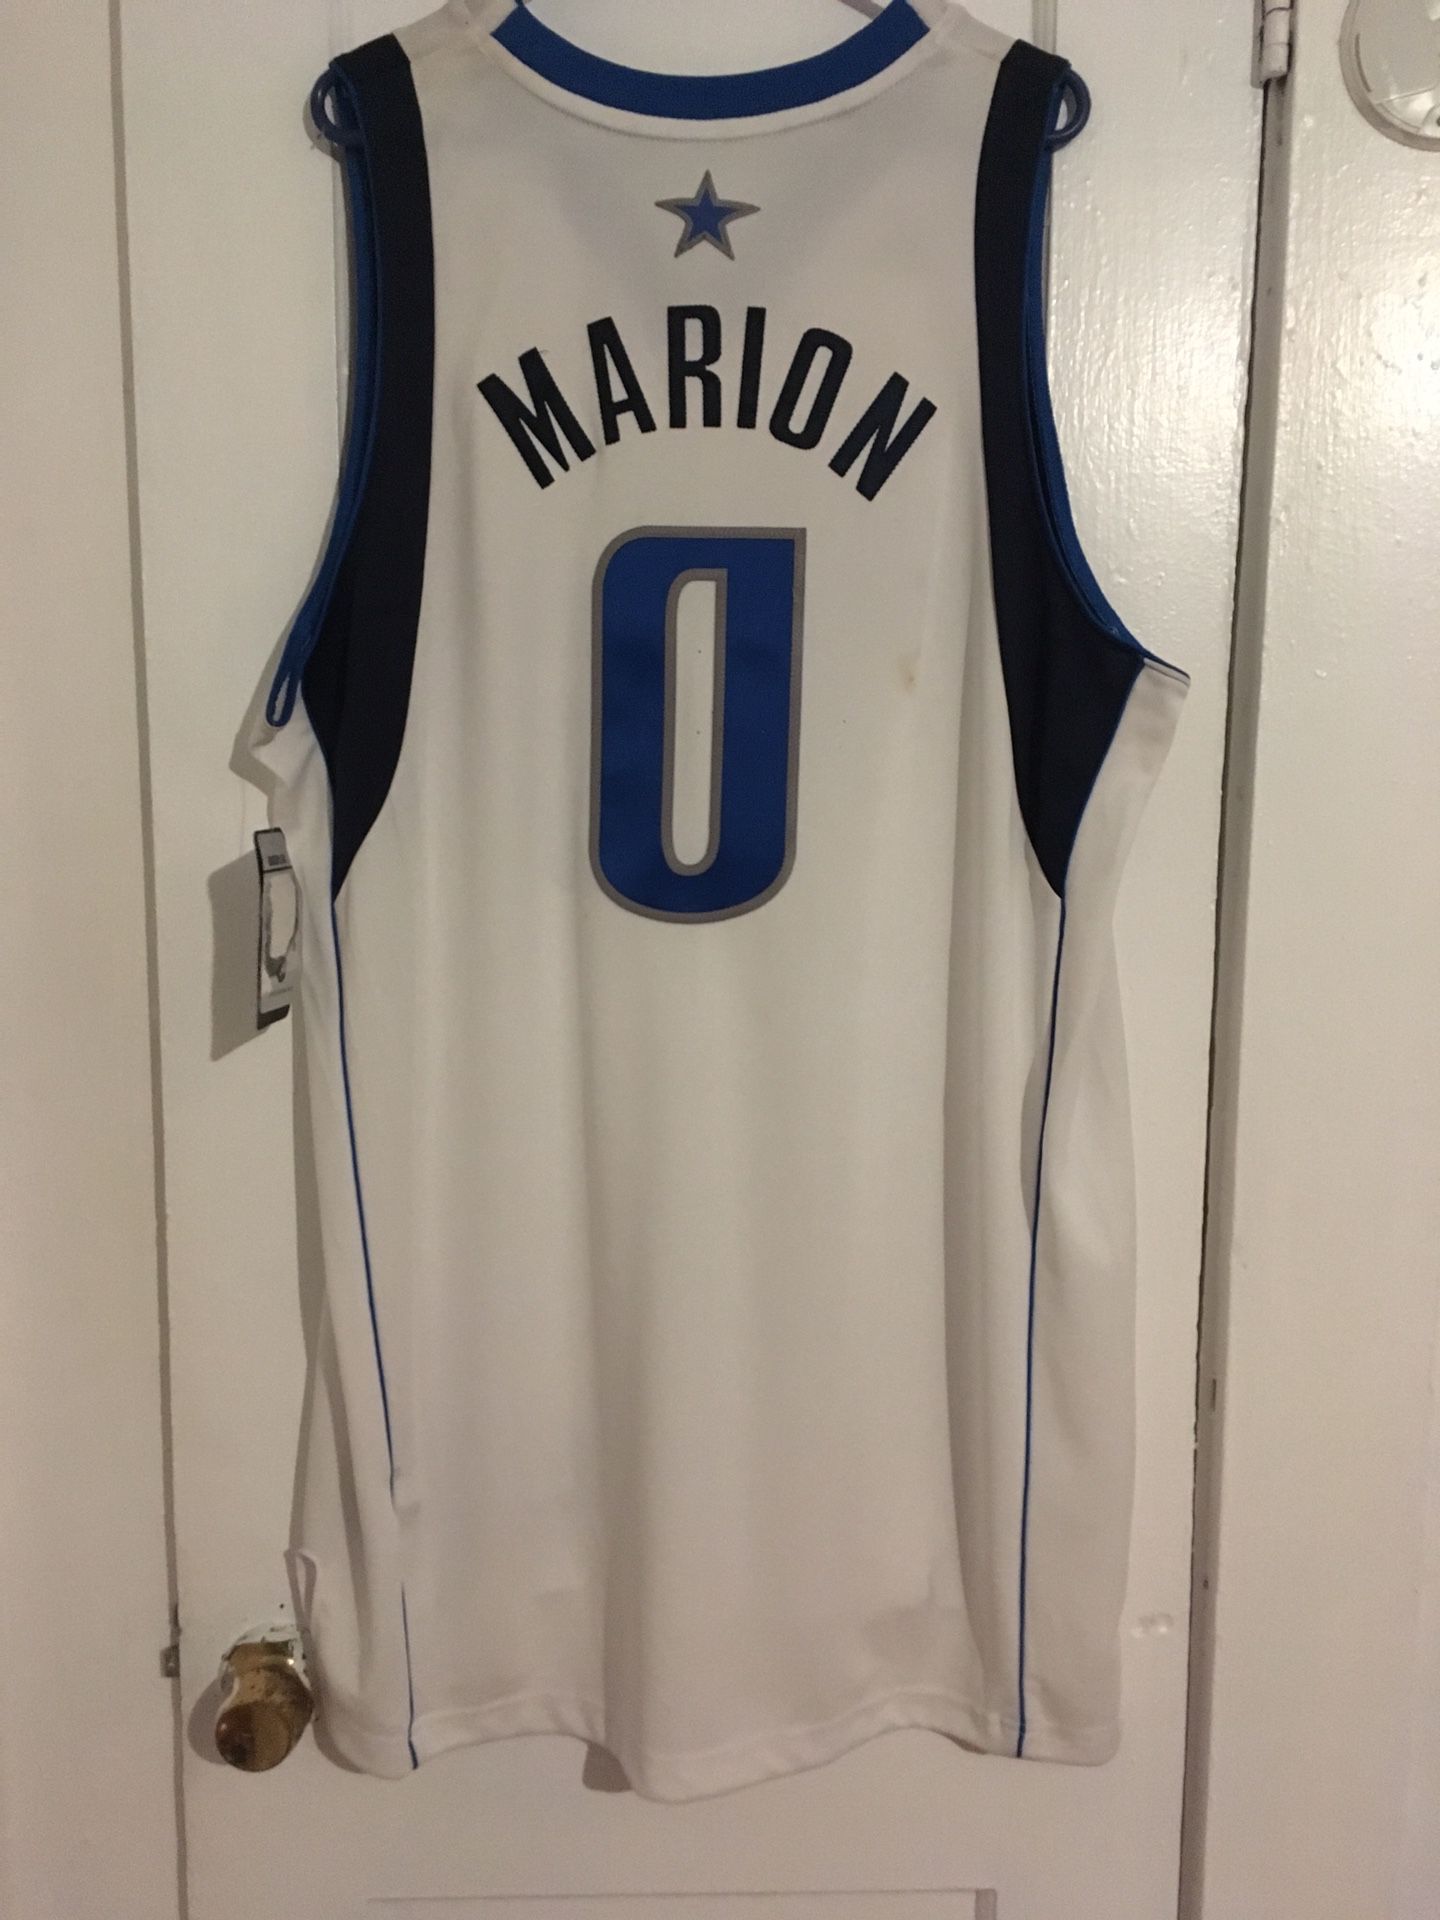 Shawn Marion Jersey